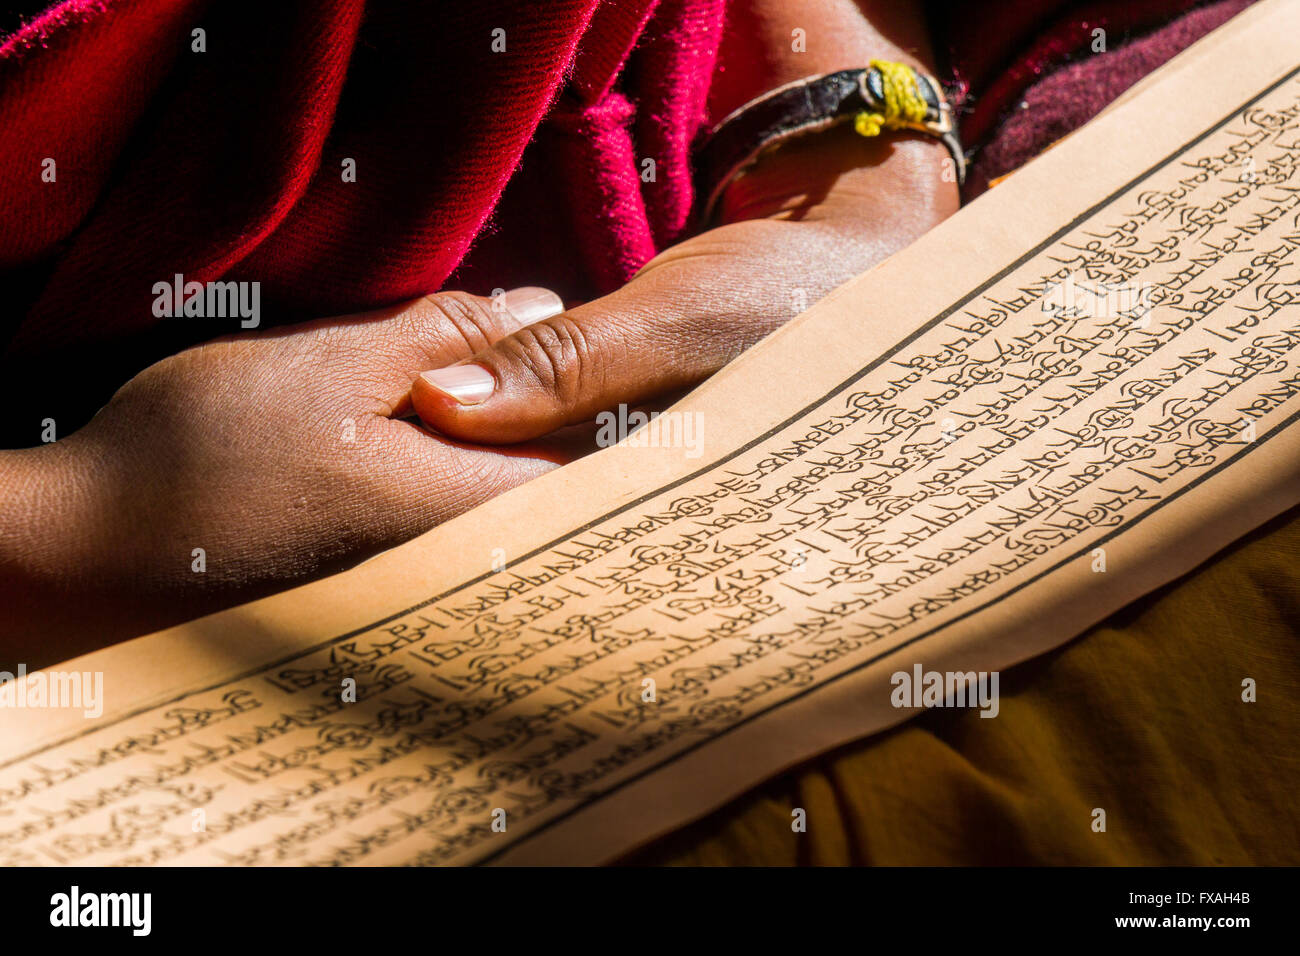 A monk is reading a prayer book inside the monastery Thupten Chholing Gompa, detail of the prayer book and his hands, Junbesi Stock Photo